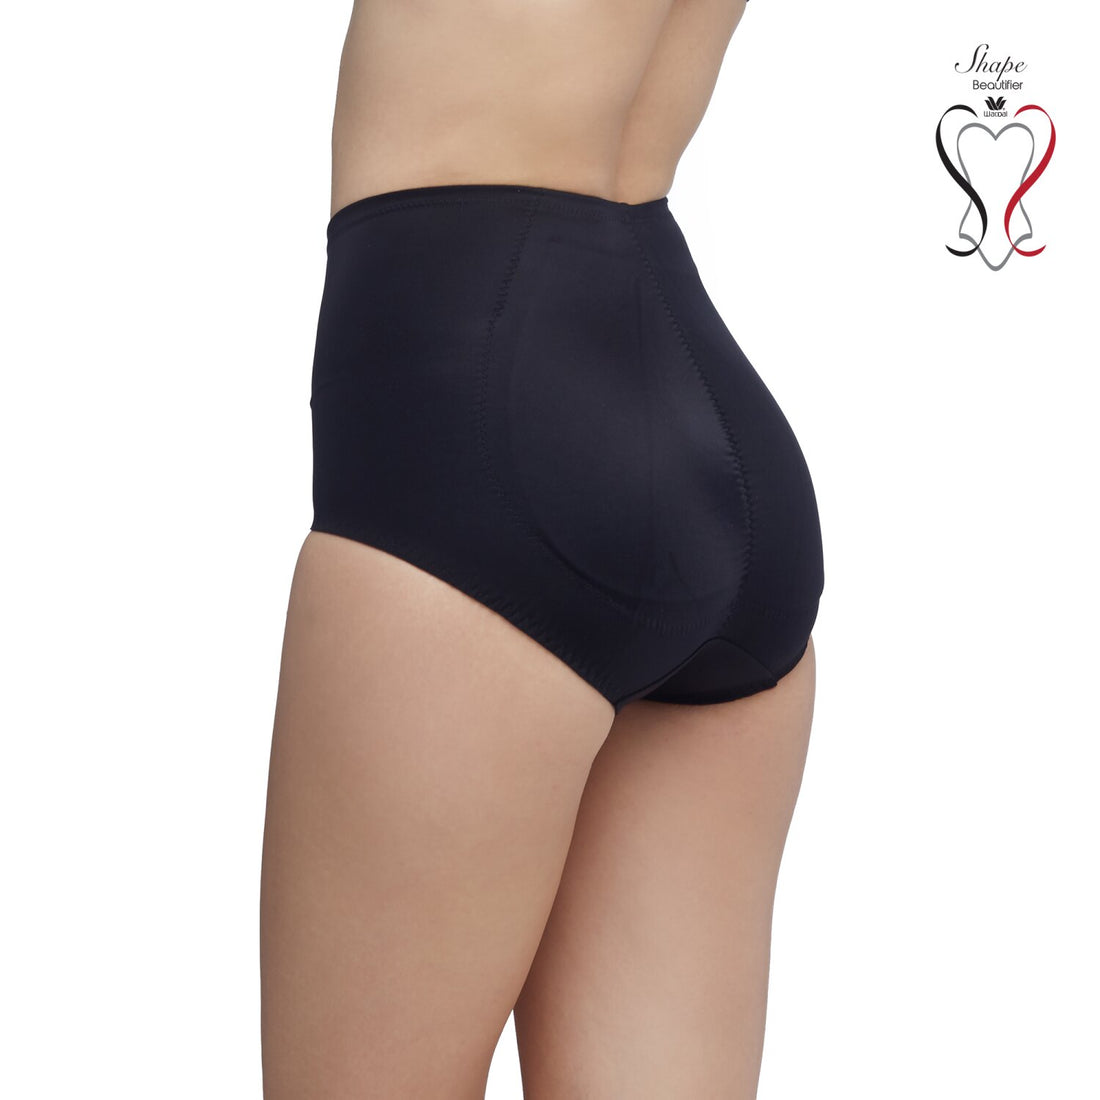 Wacoal Shape Beautifier Stay Slimming pants for the abdomen and